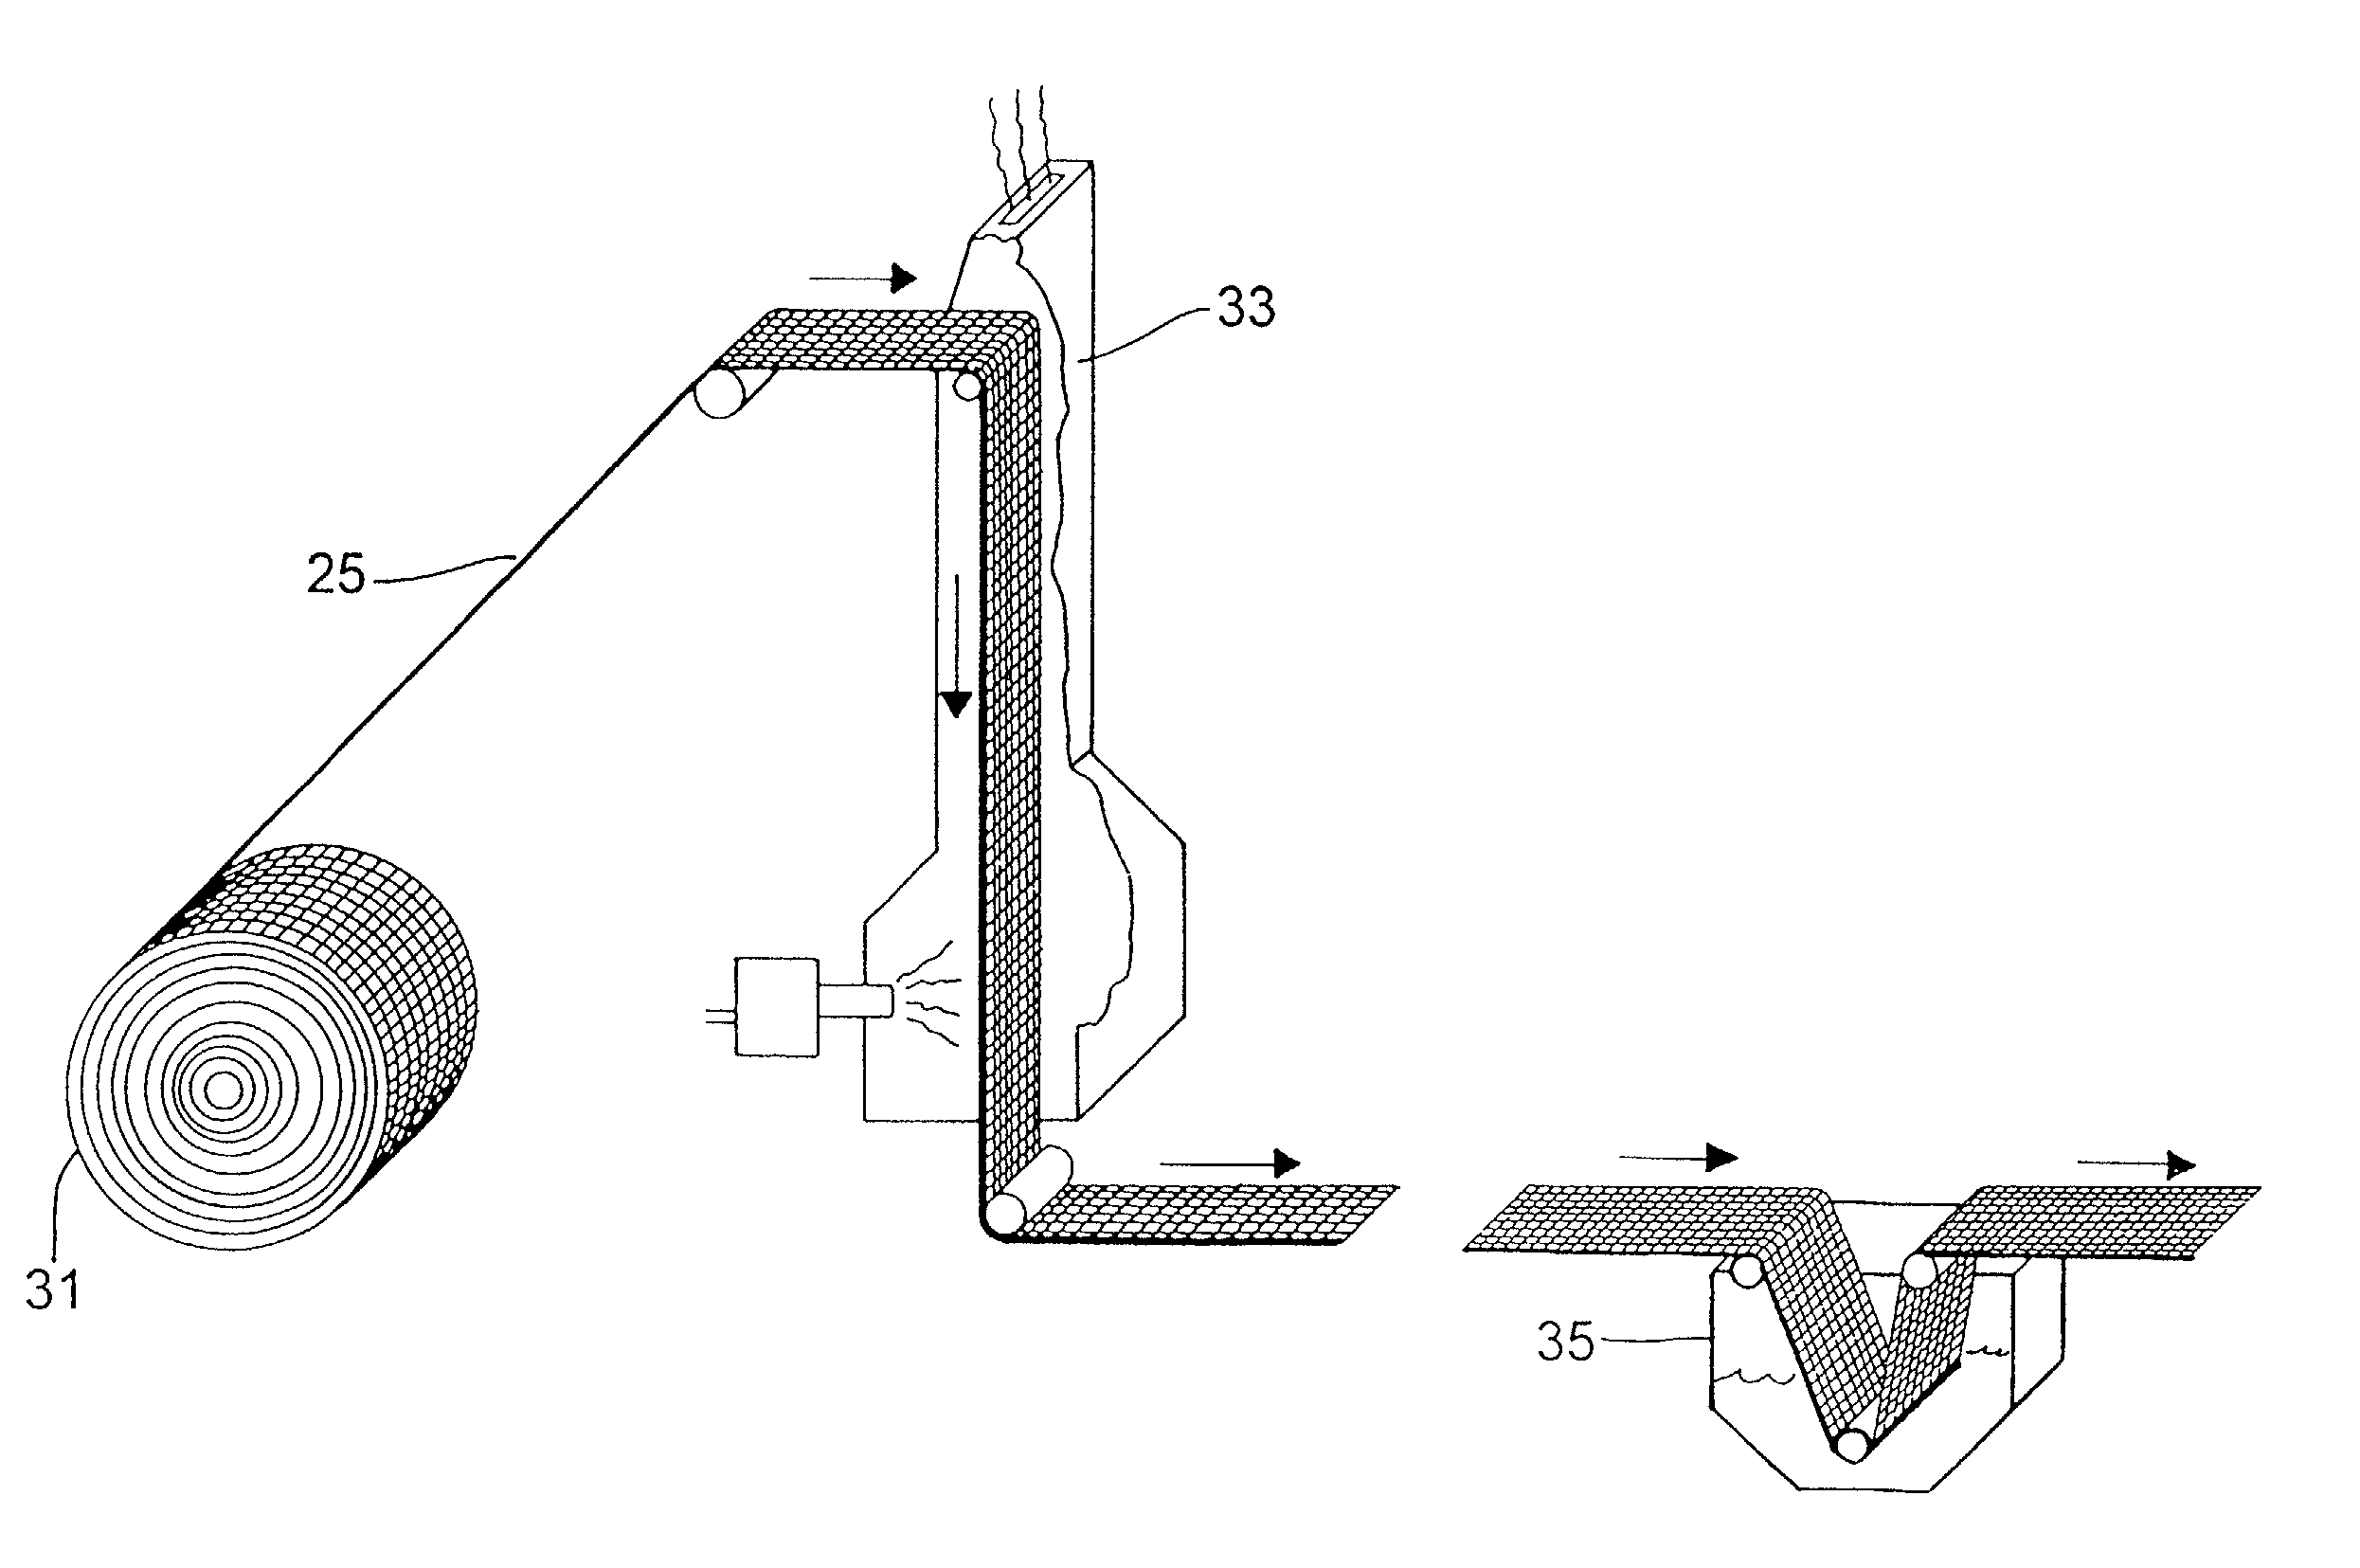 Method of manufacturing a catalytic converter